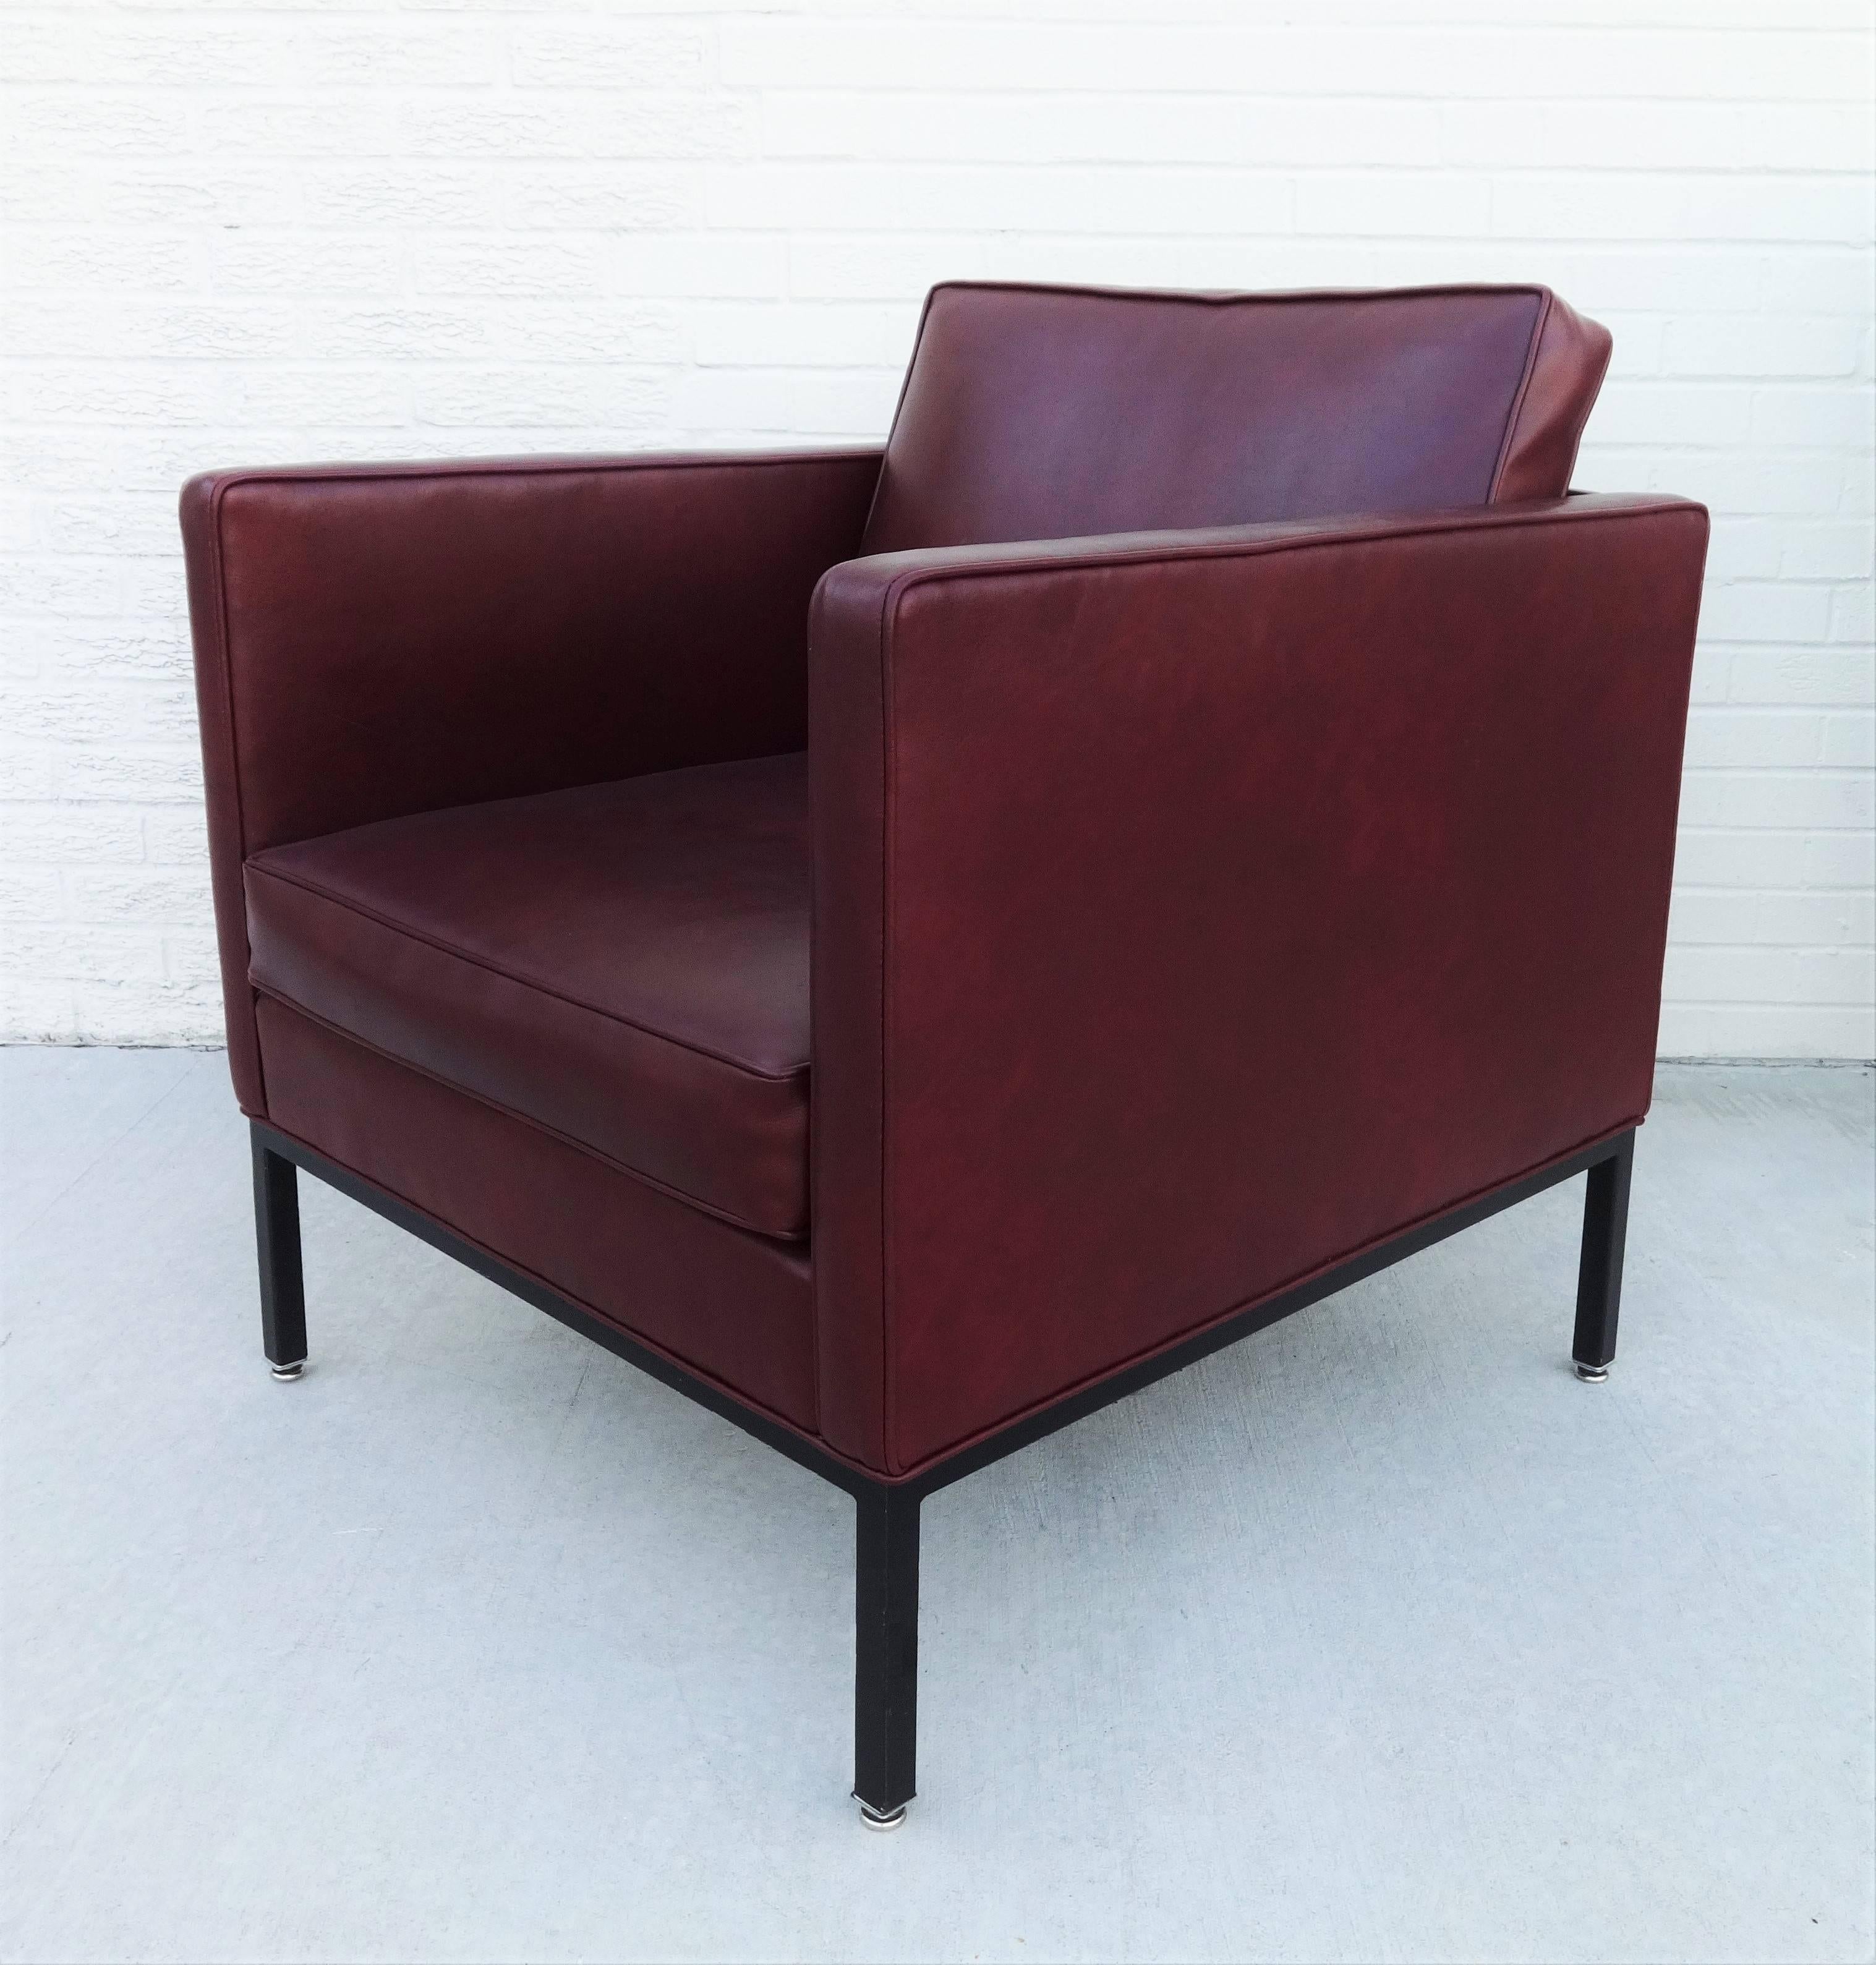 These Florence Knoll style club chairs maintain their original upholstery, standing on a black lacquered metal frame. Evidently reupholstered sometime in the 1980s, with a vinyl upholstery. Can be used as they are or reupholstered to match. Call us